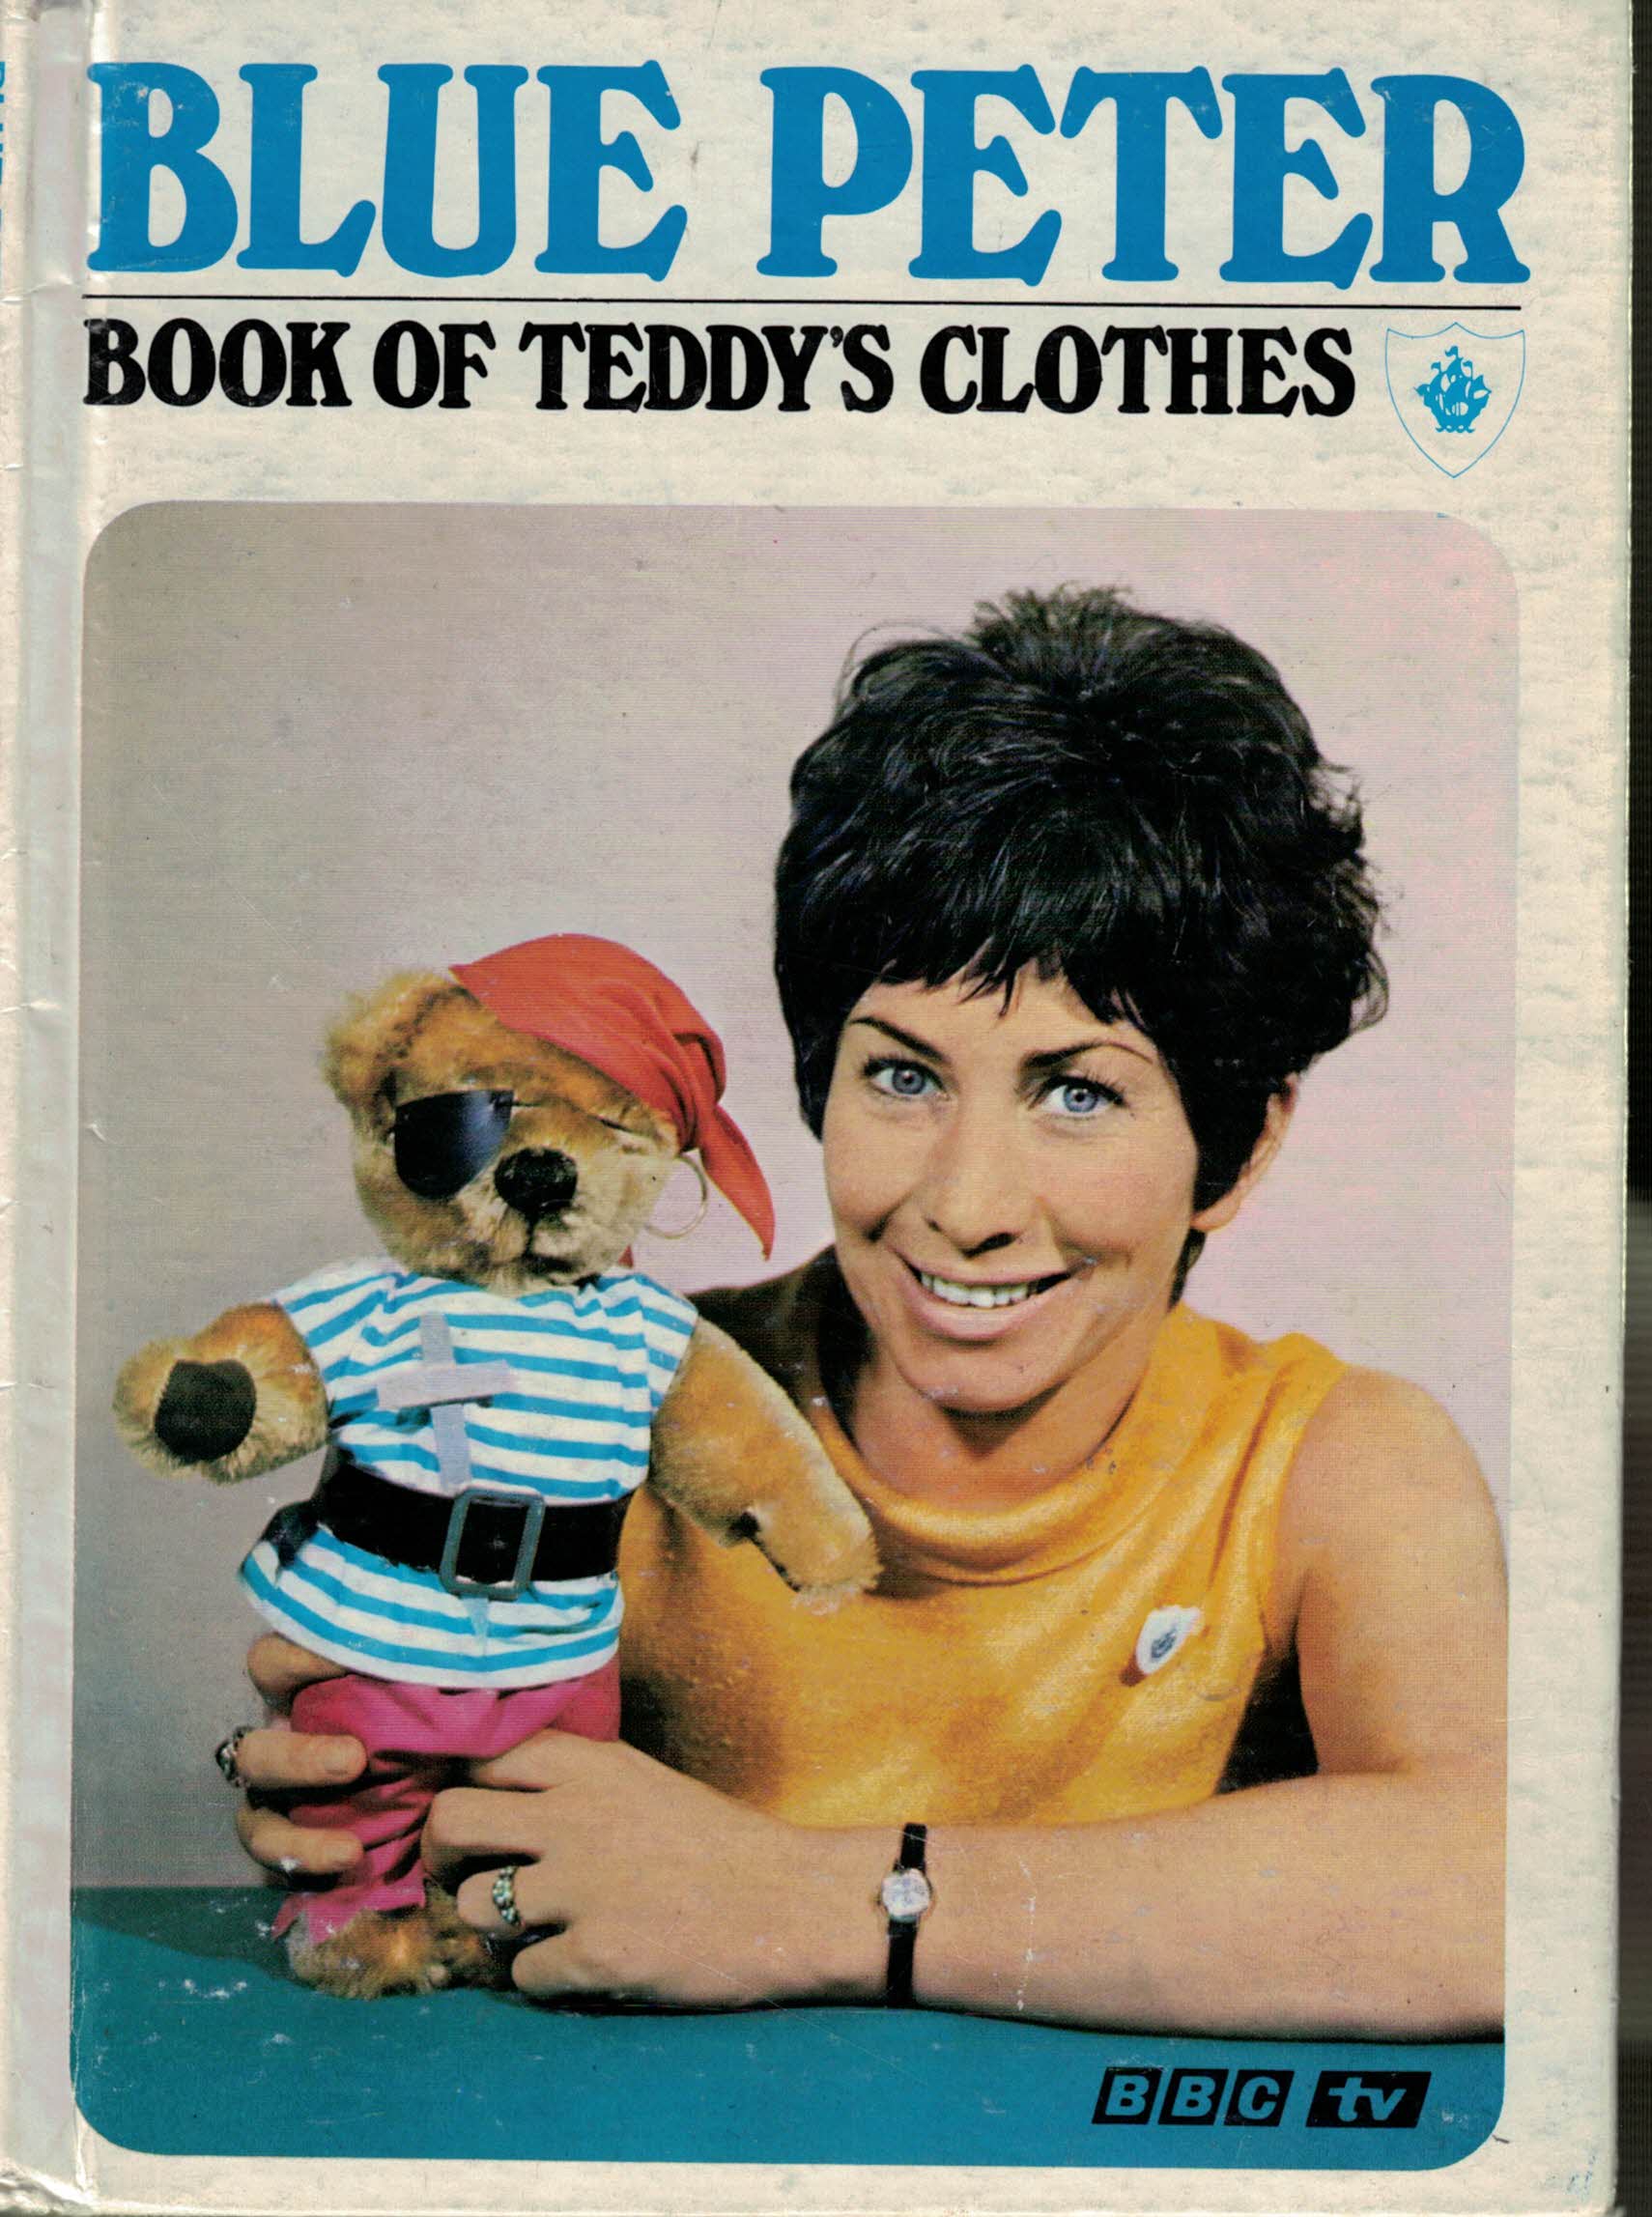 Blue Peter Book of Teddy's Clothes with Valerie Singleton.